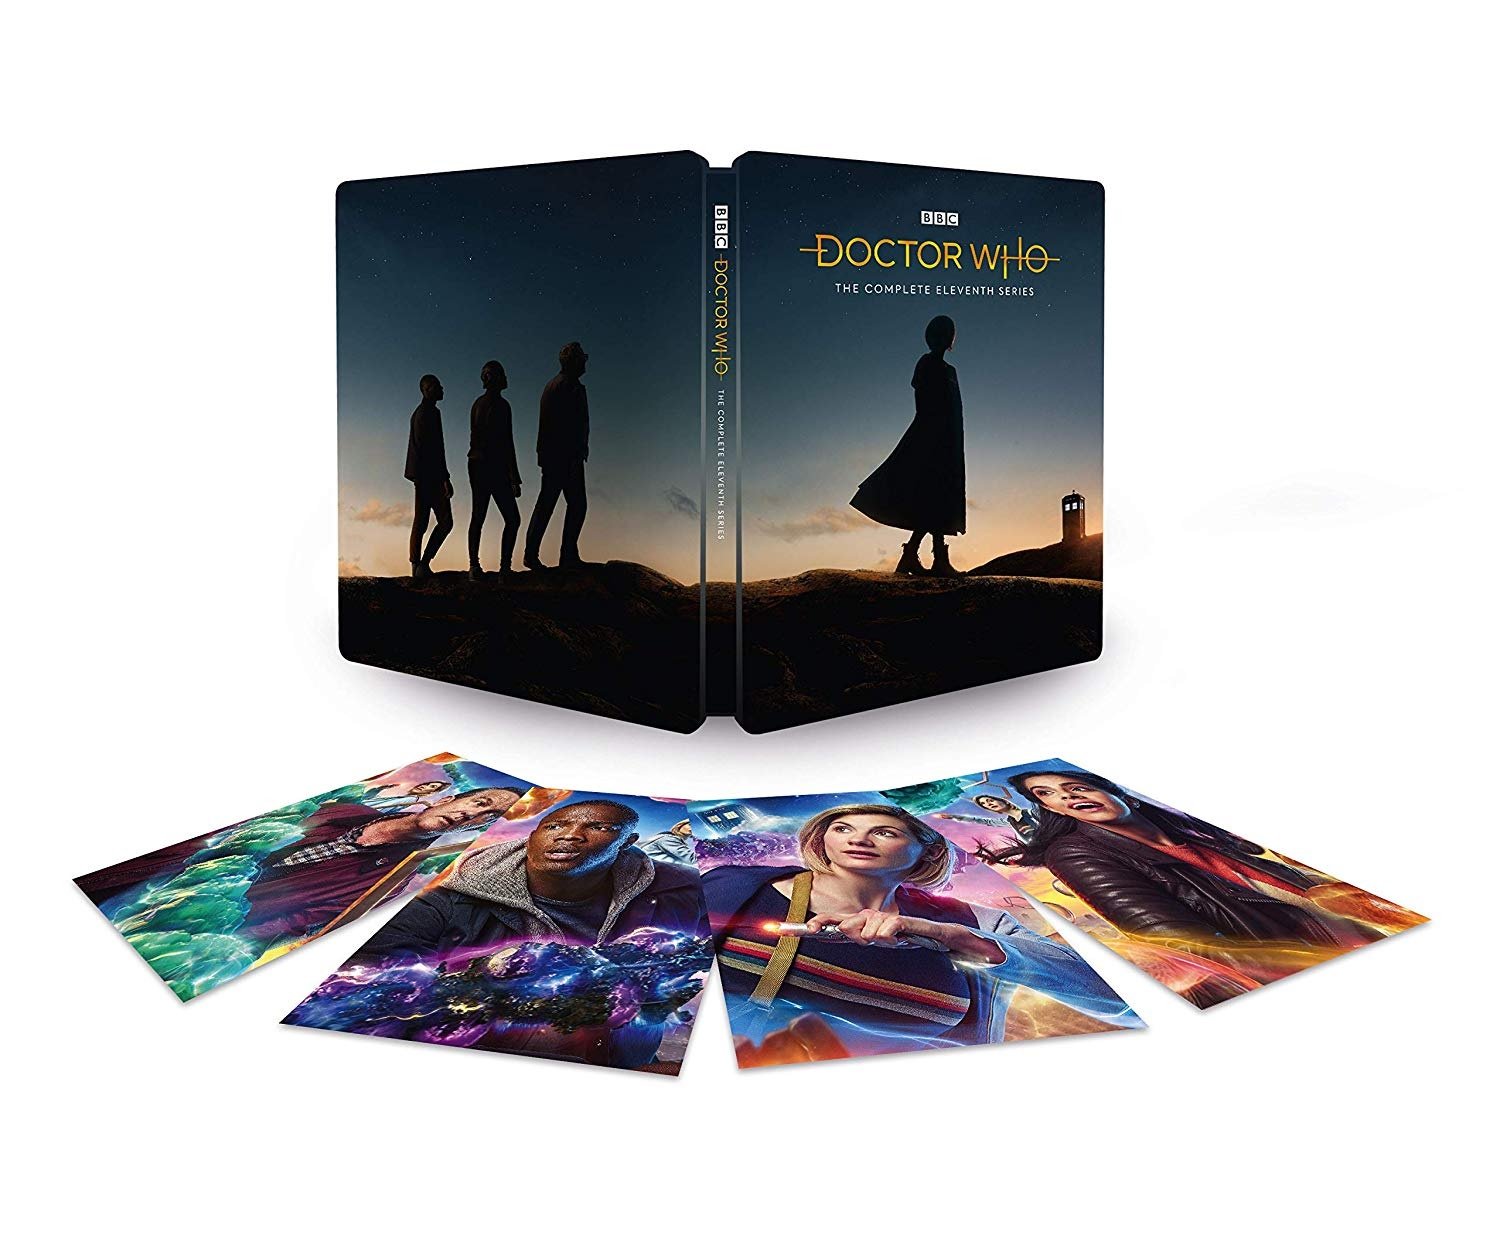 Reviewed: Doctor Who Complete Series 11 DVD and Blu-ray